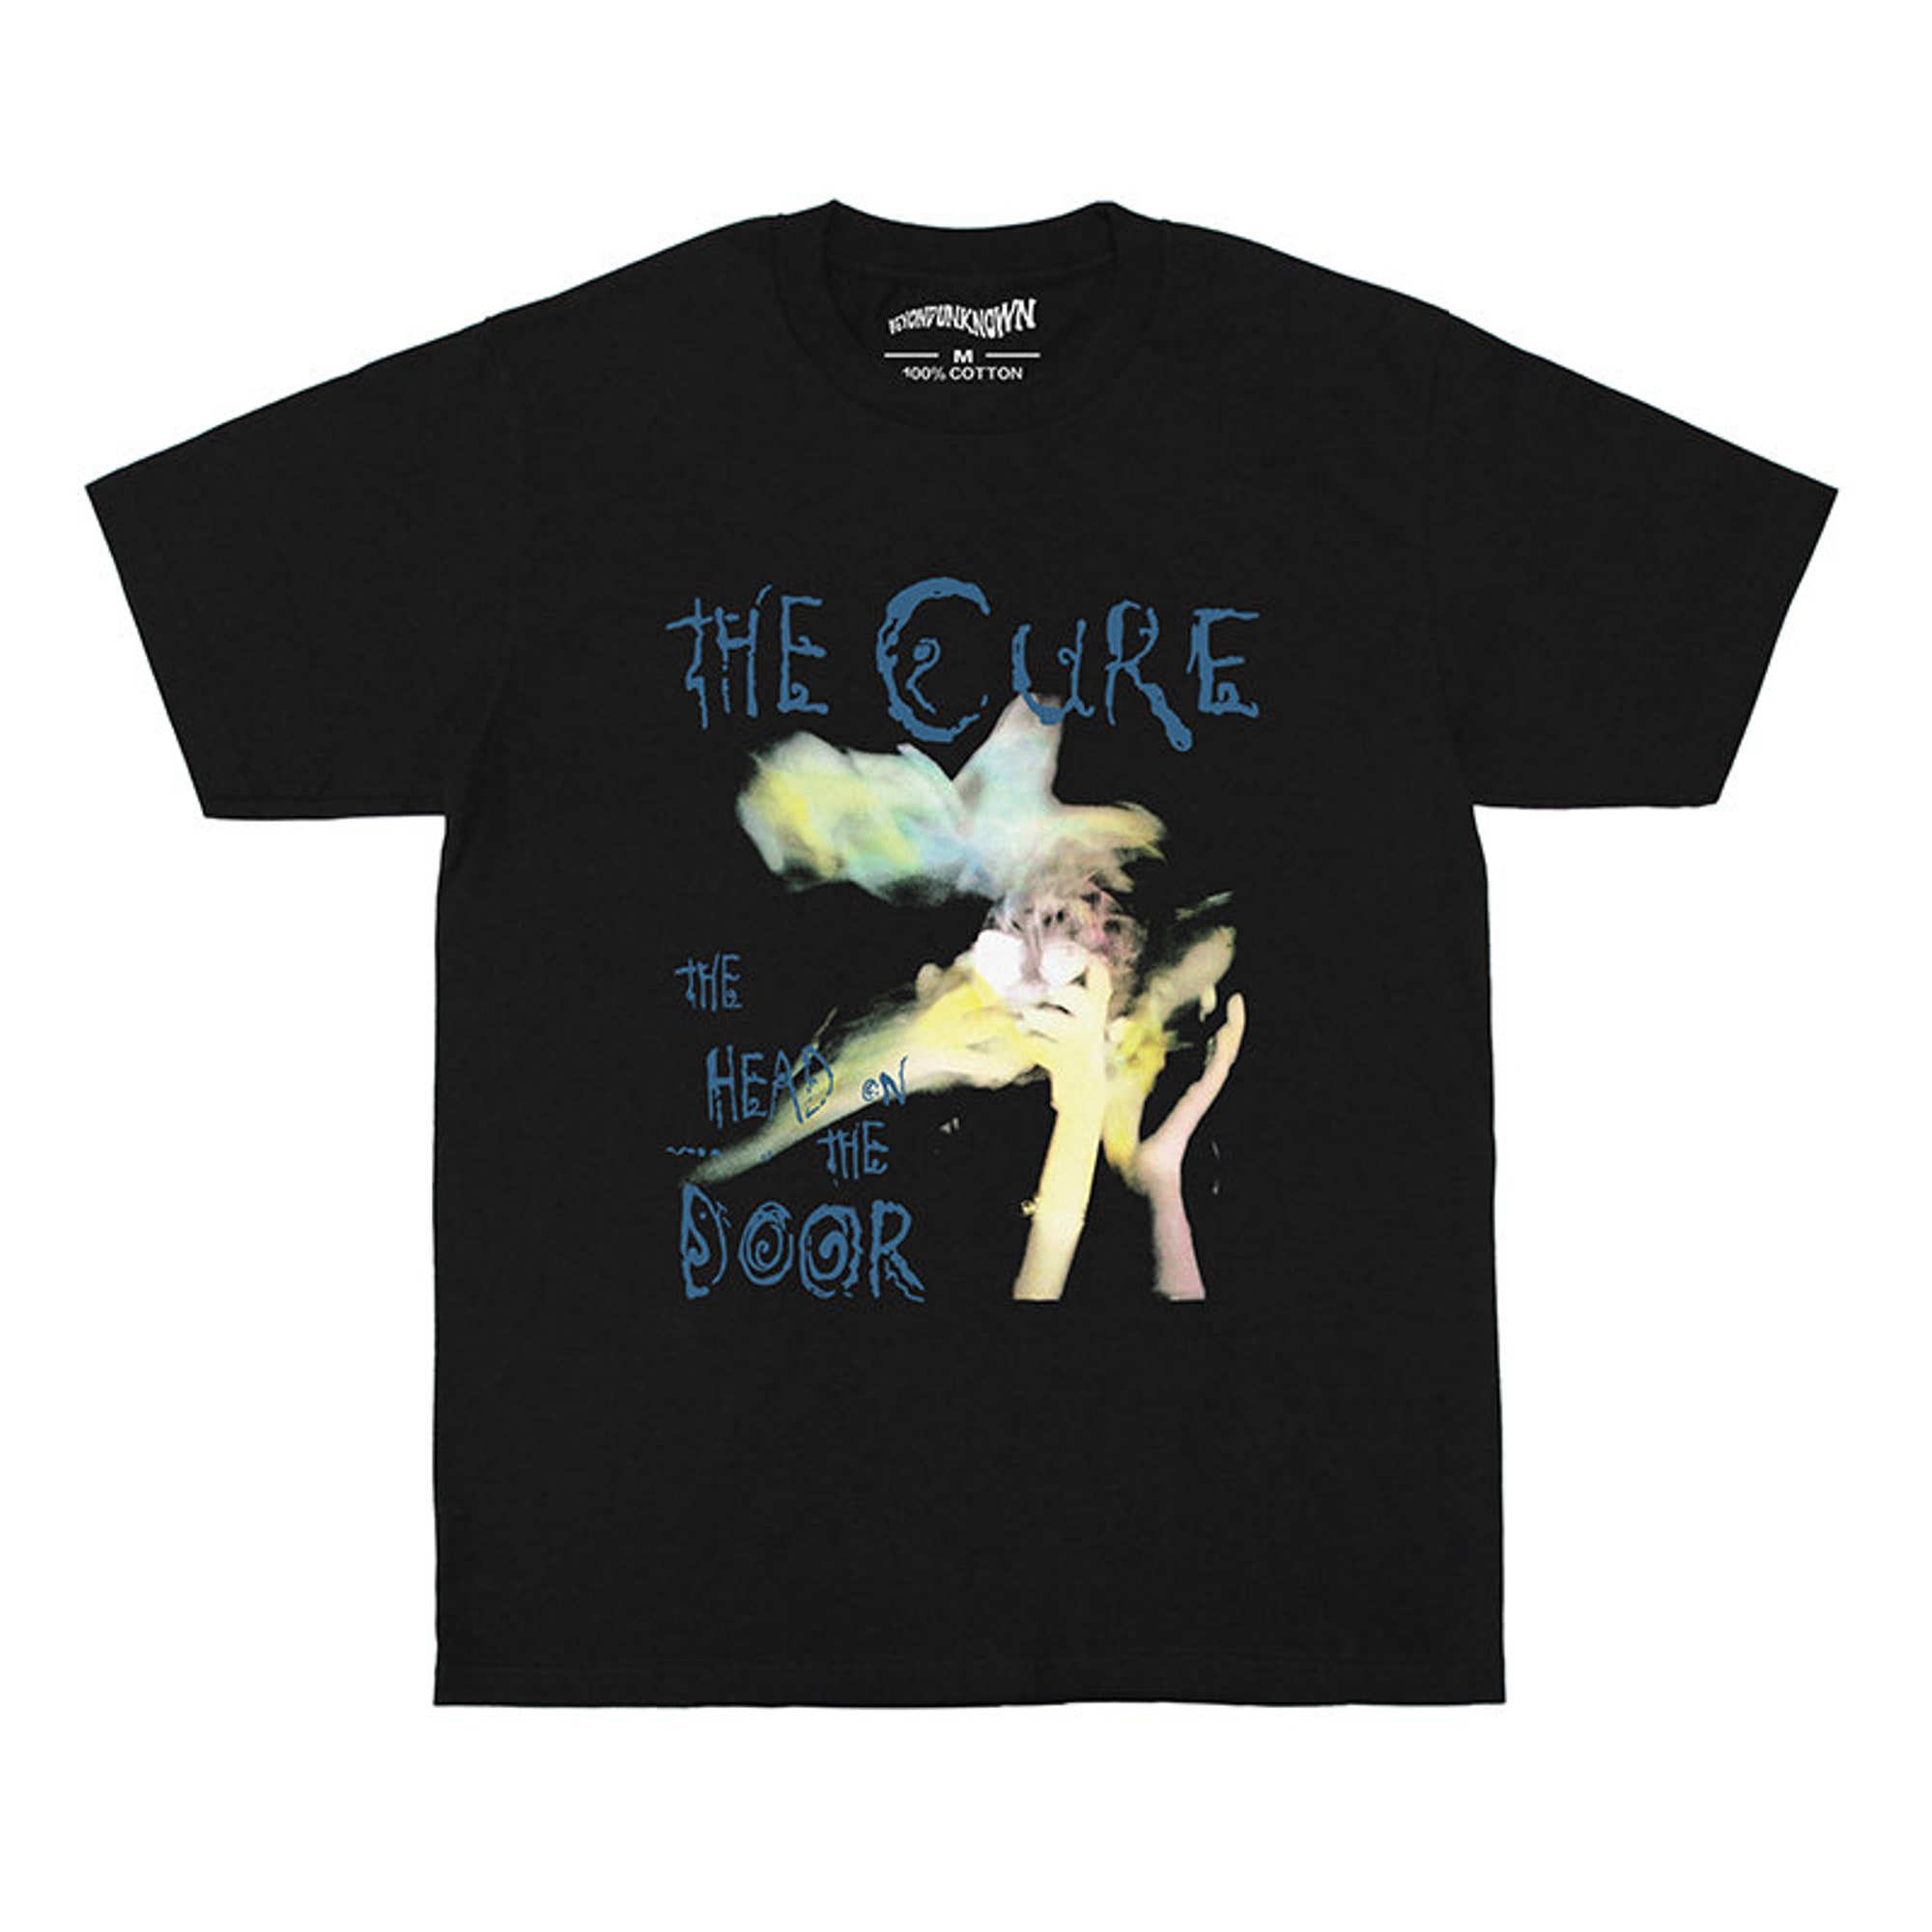 The Cure The Head On The Door Vintage T-Shirt, The Cure Shirt